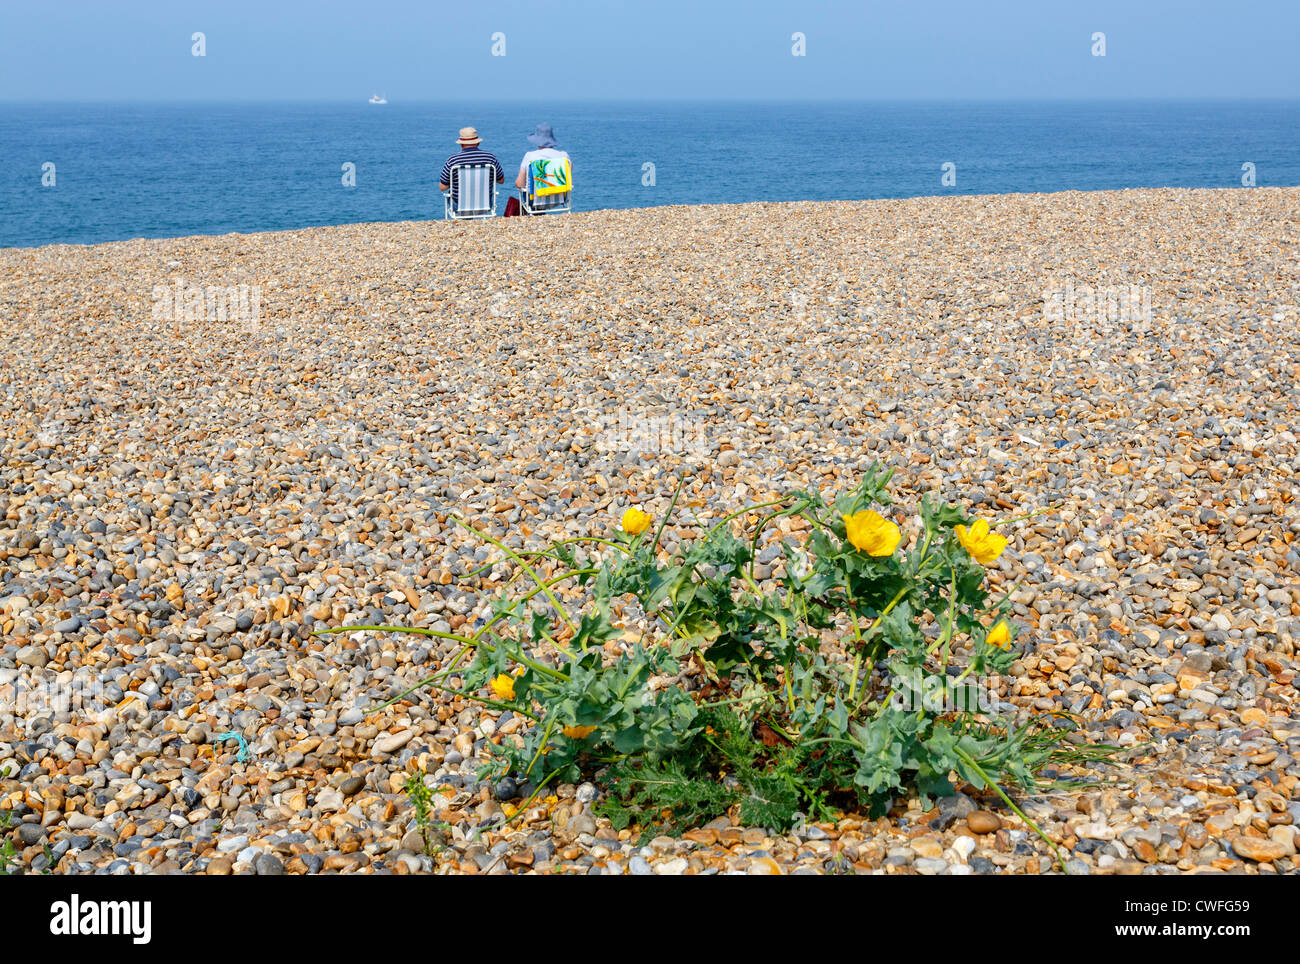 People relaxing on the holiday beach at Weybourne on the 'North Norfolk' coast, UK Stock Photo